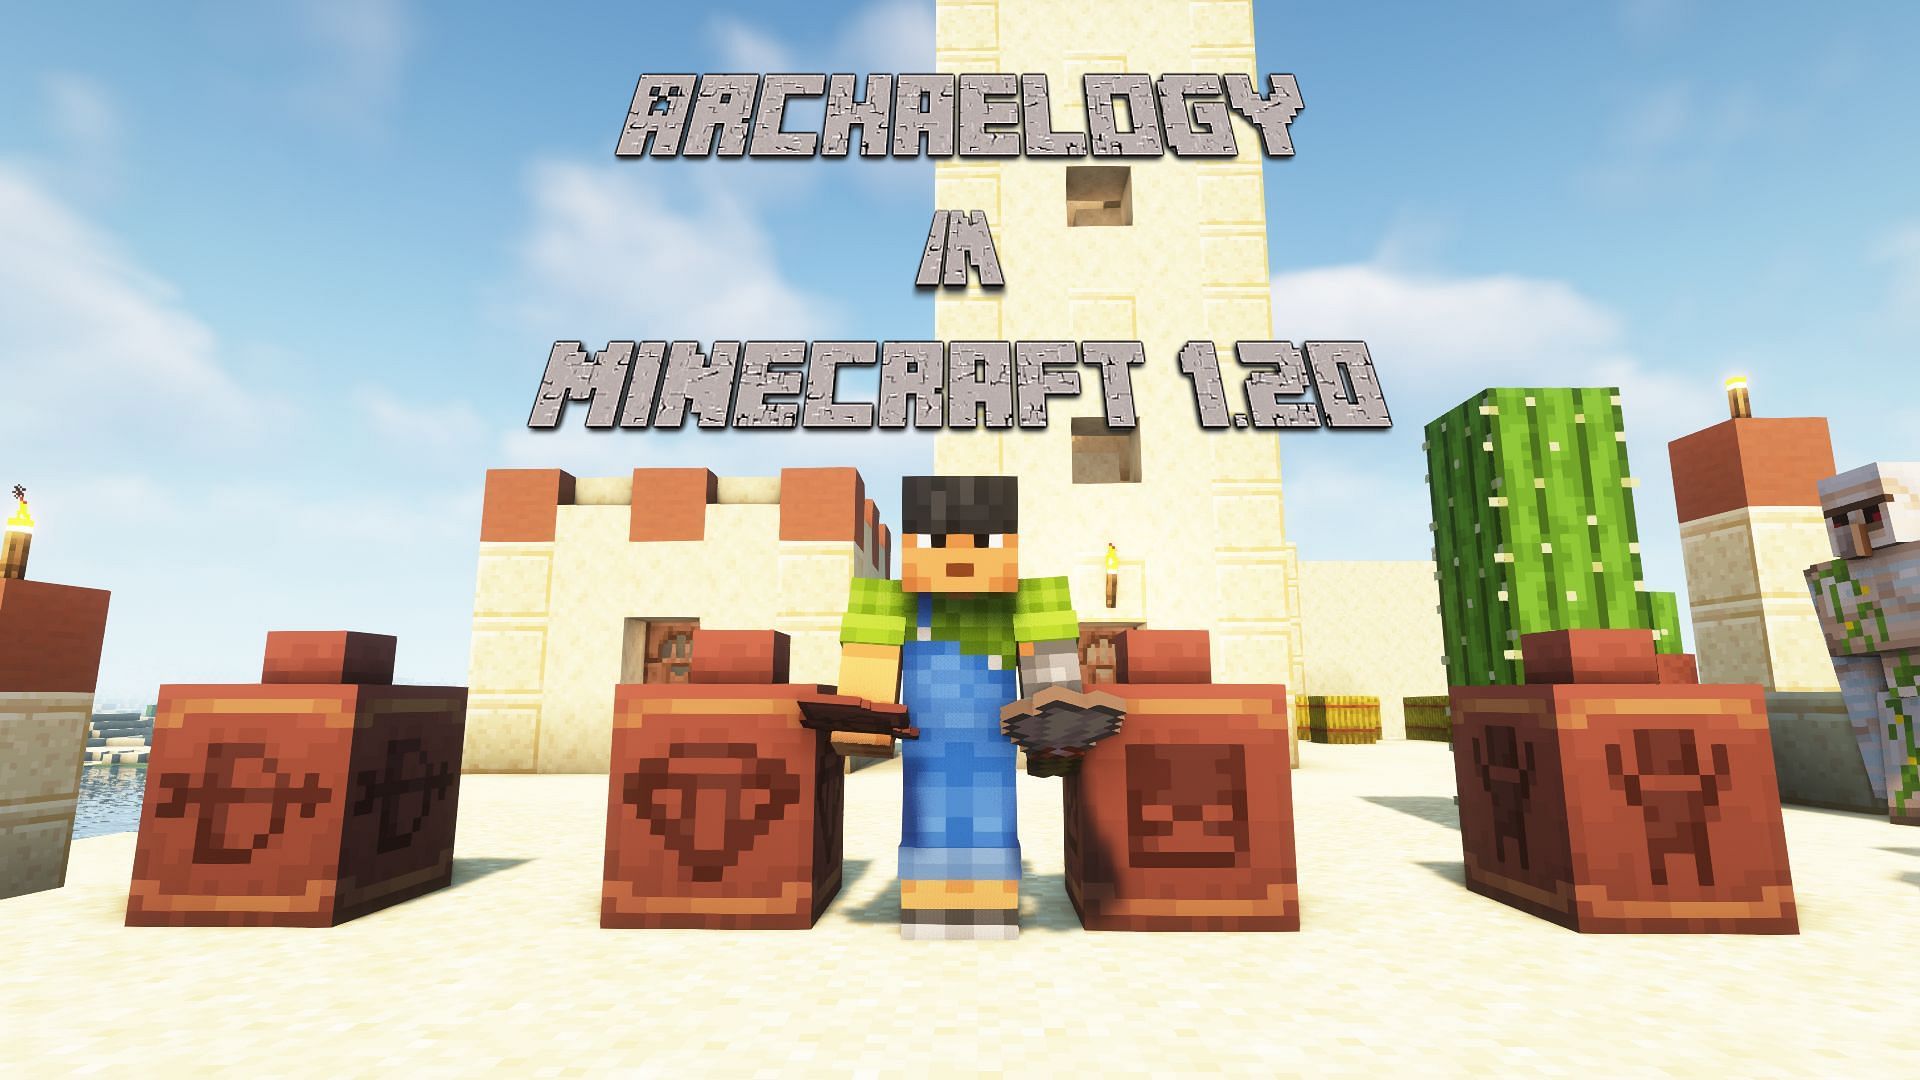 Archaeology in Minecraft (Image via Mojang)